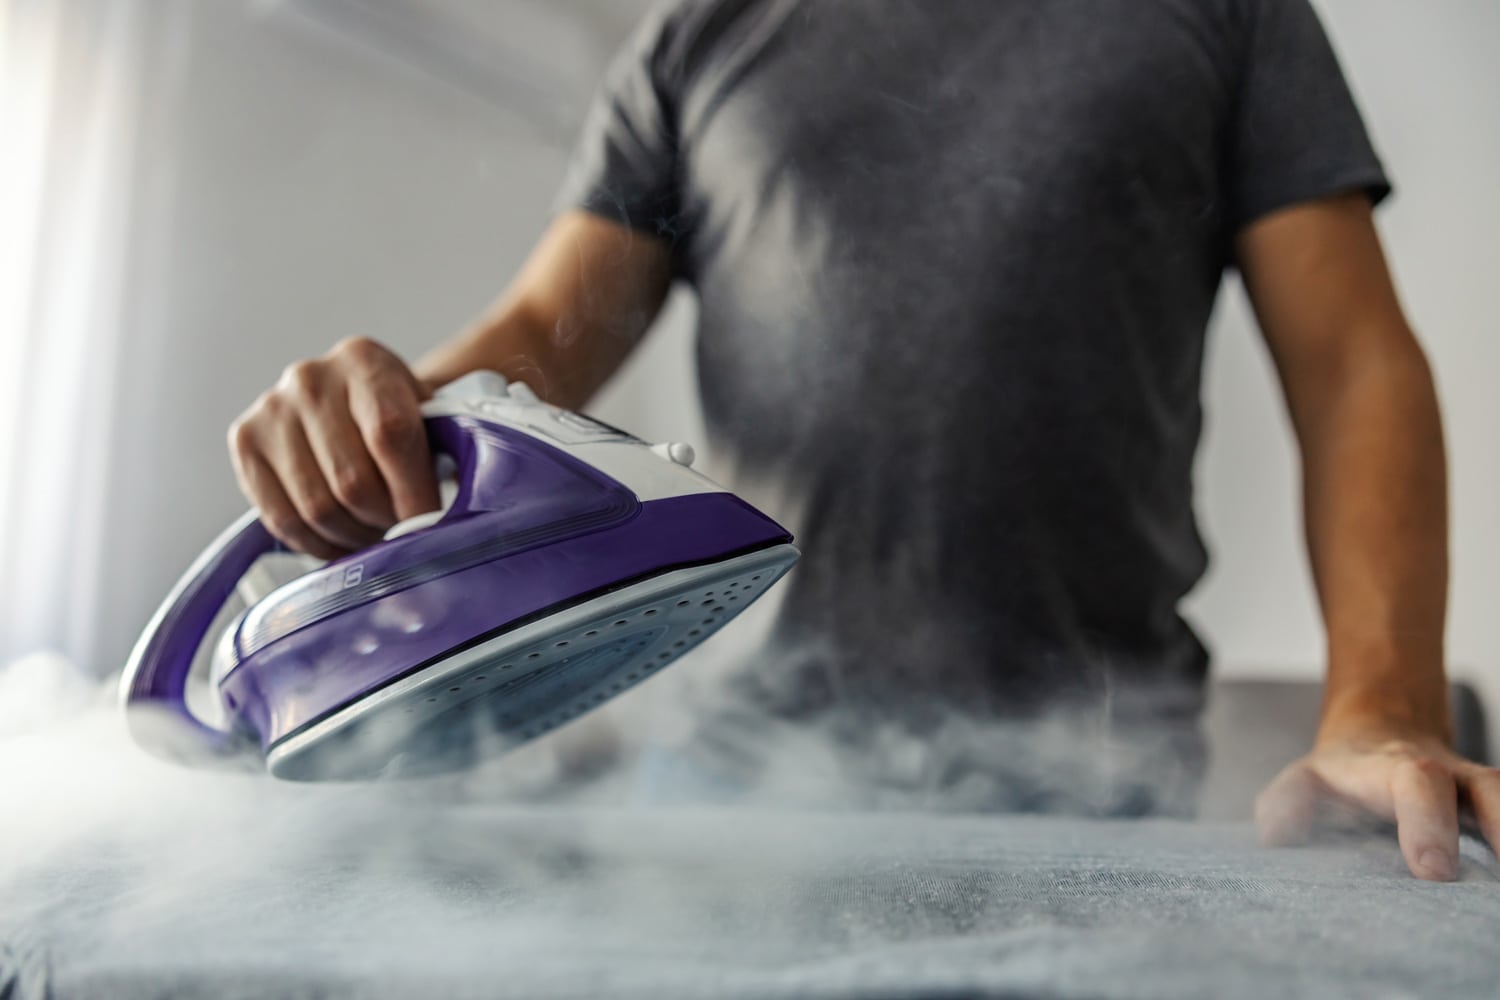 Powerful professional photo effect of water vapor from the hot iron. A modern lifestyle concept, a man who irons clothes at home